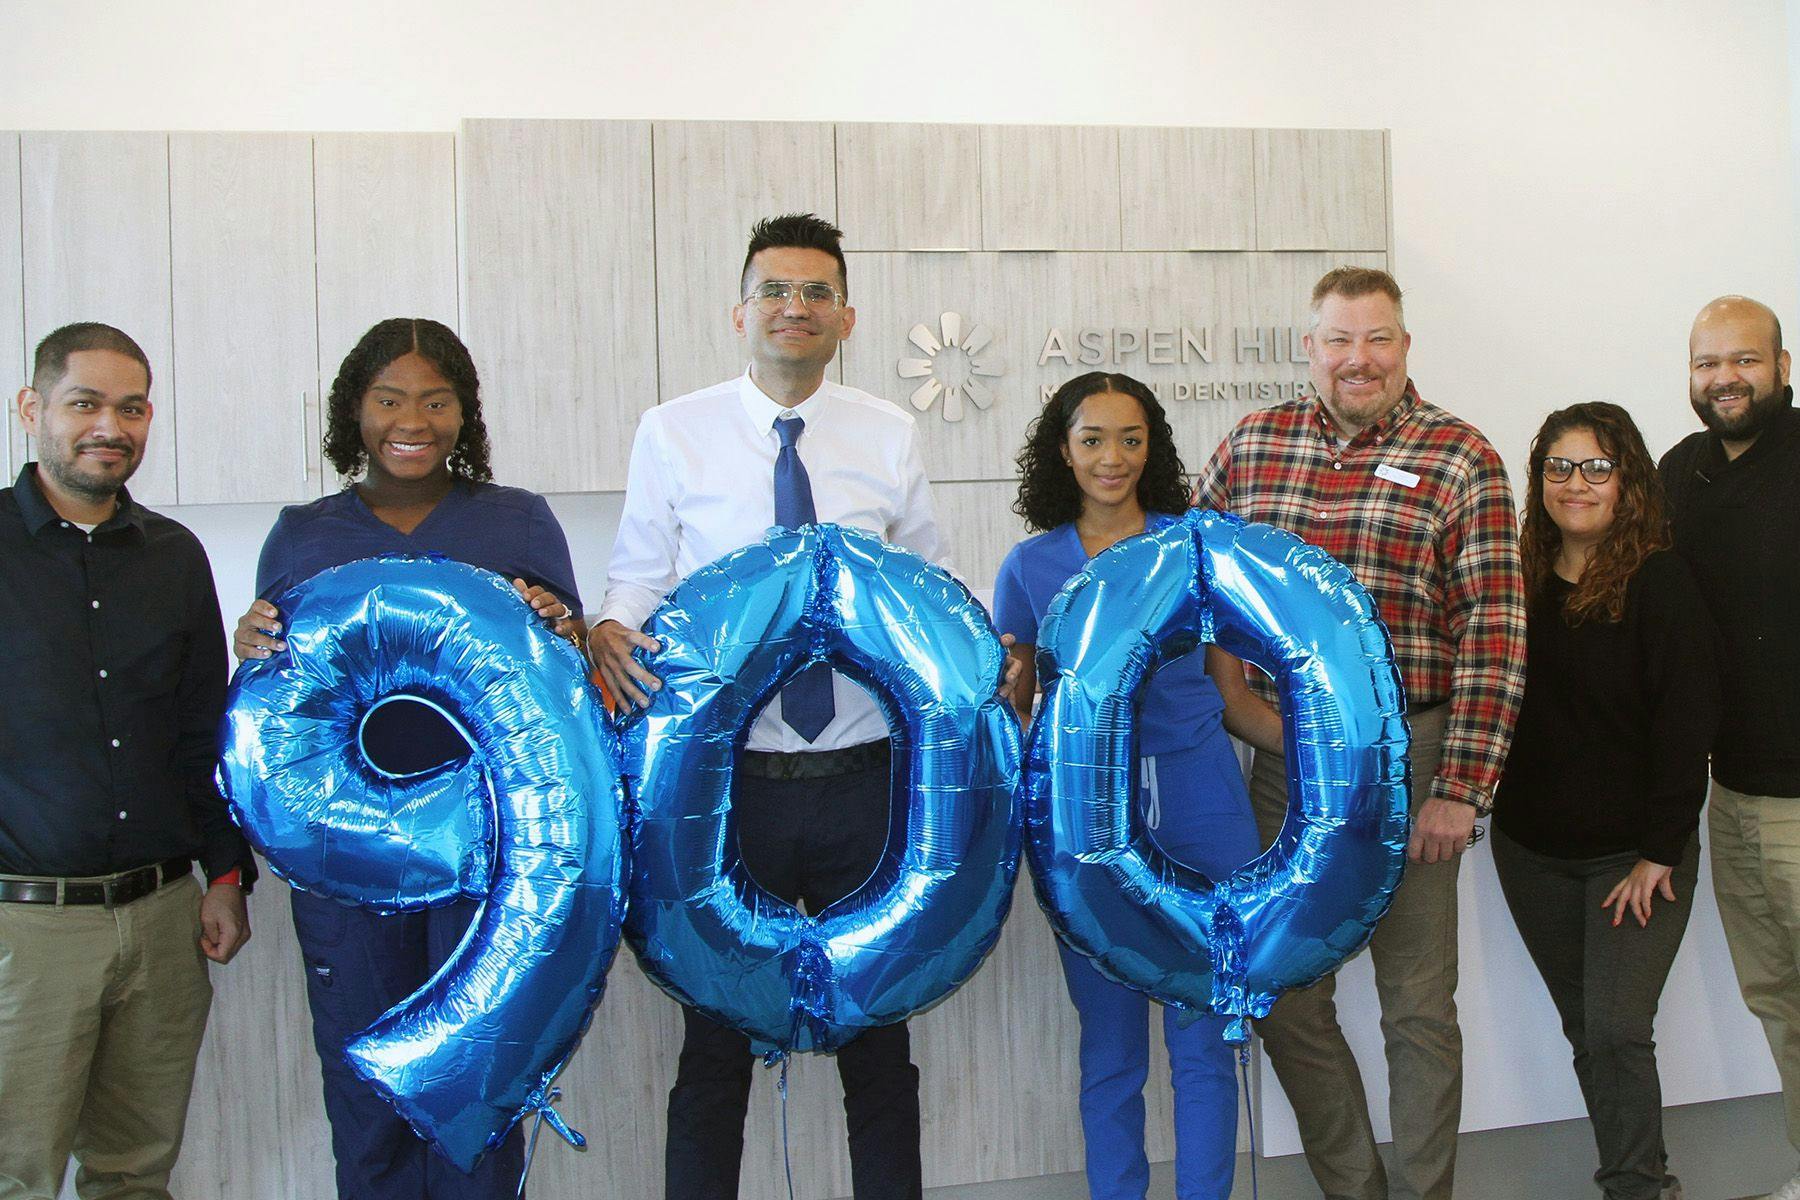 Pacific Dental Services Celebrates 900th Supported Practice Milestone